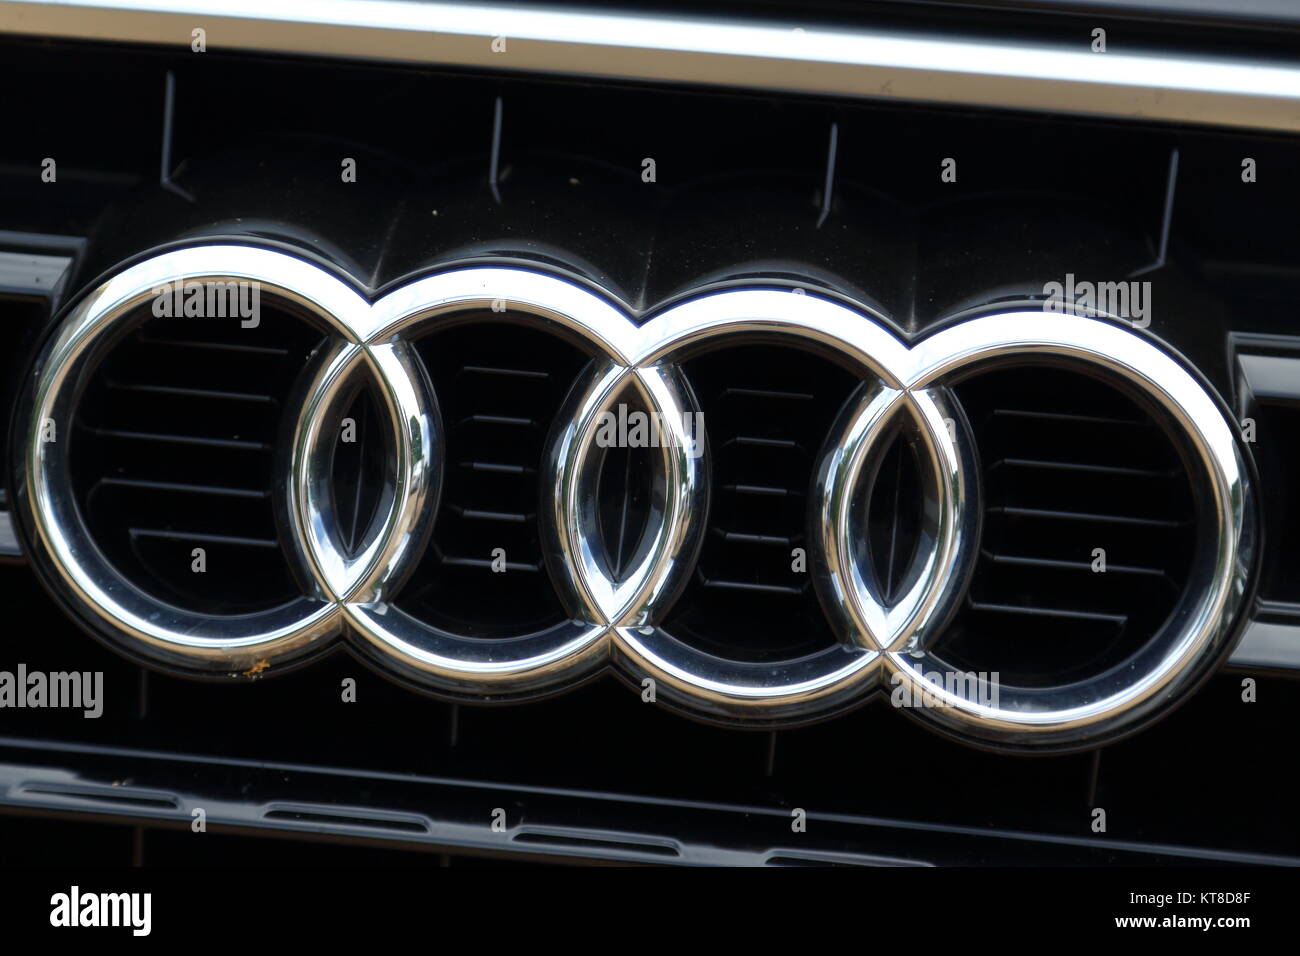 AUDI Emblem LED Light Front Glow Logo Badge Rings Black Grill A3 A4 A5 A6  for sale online